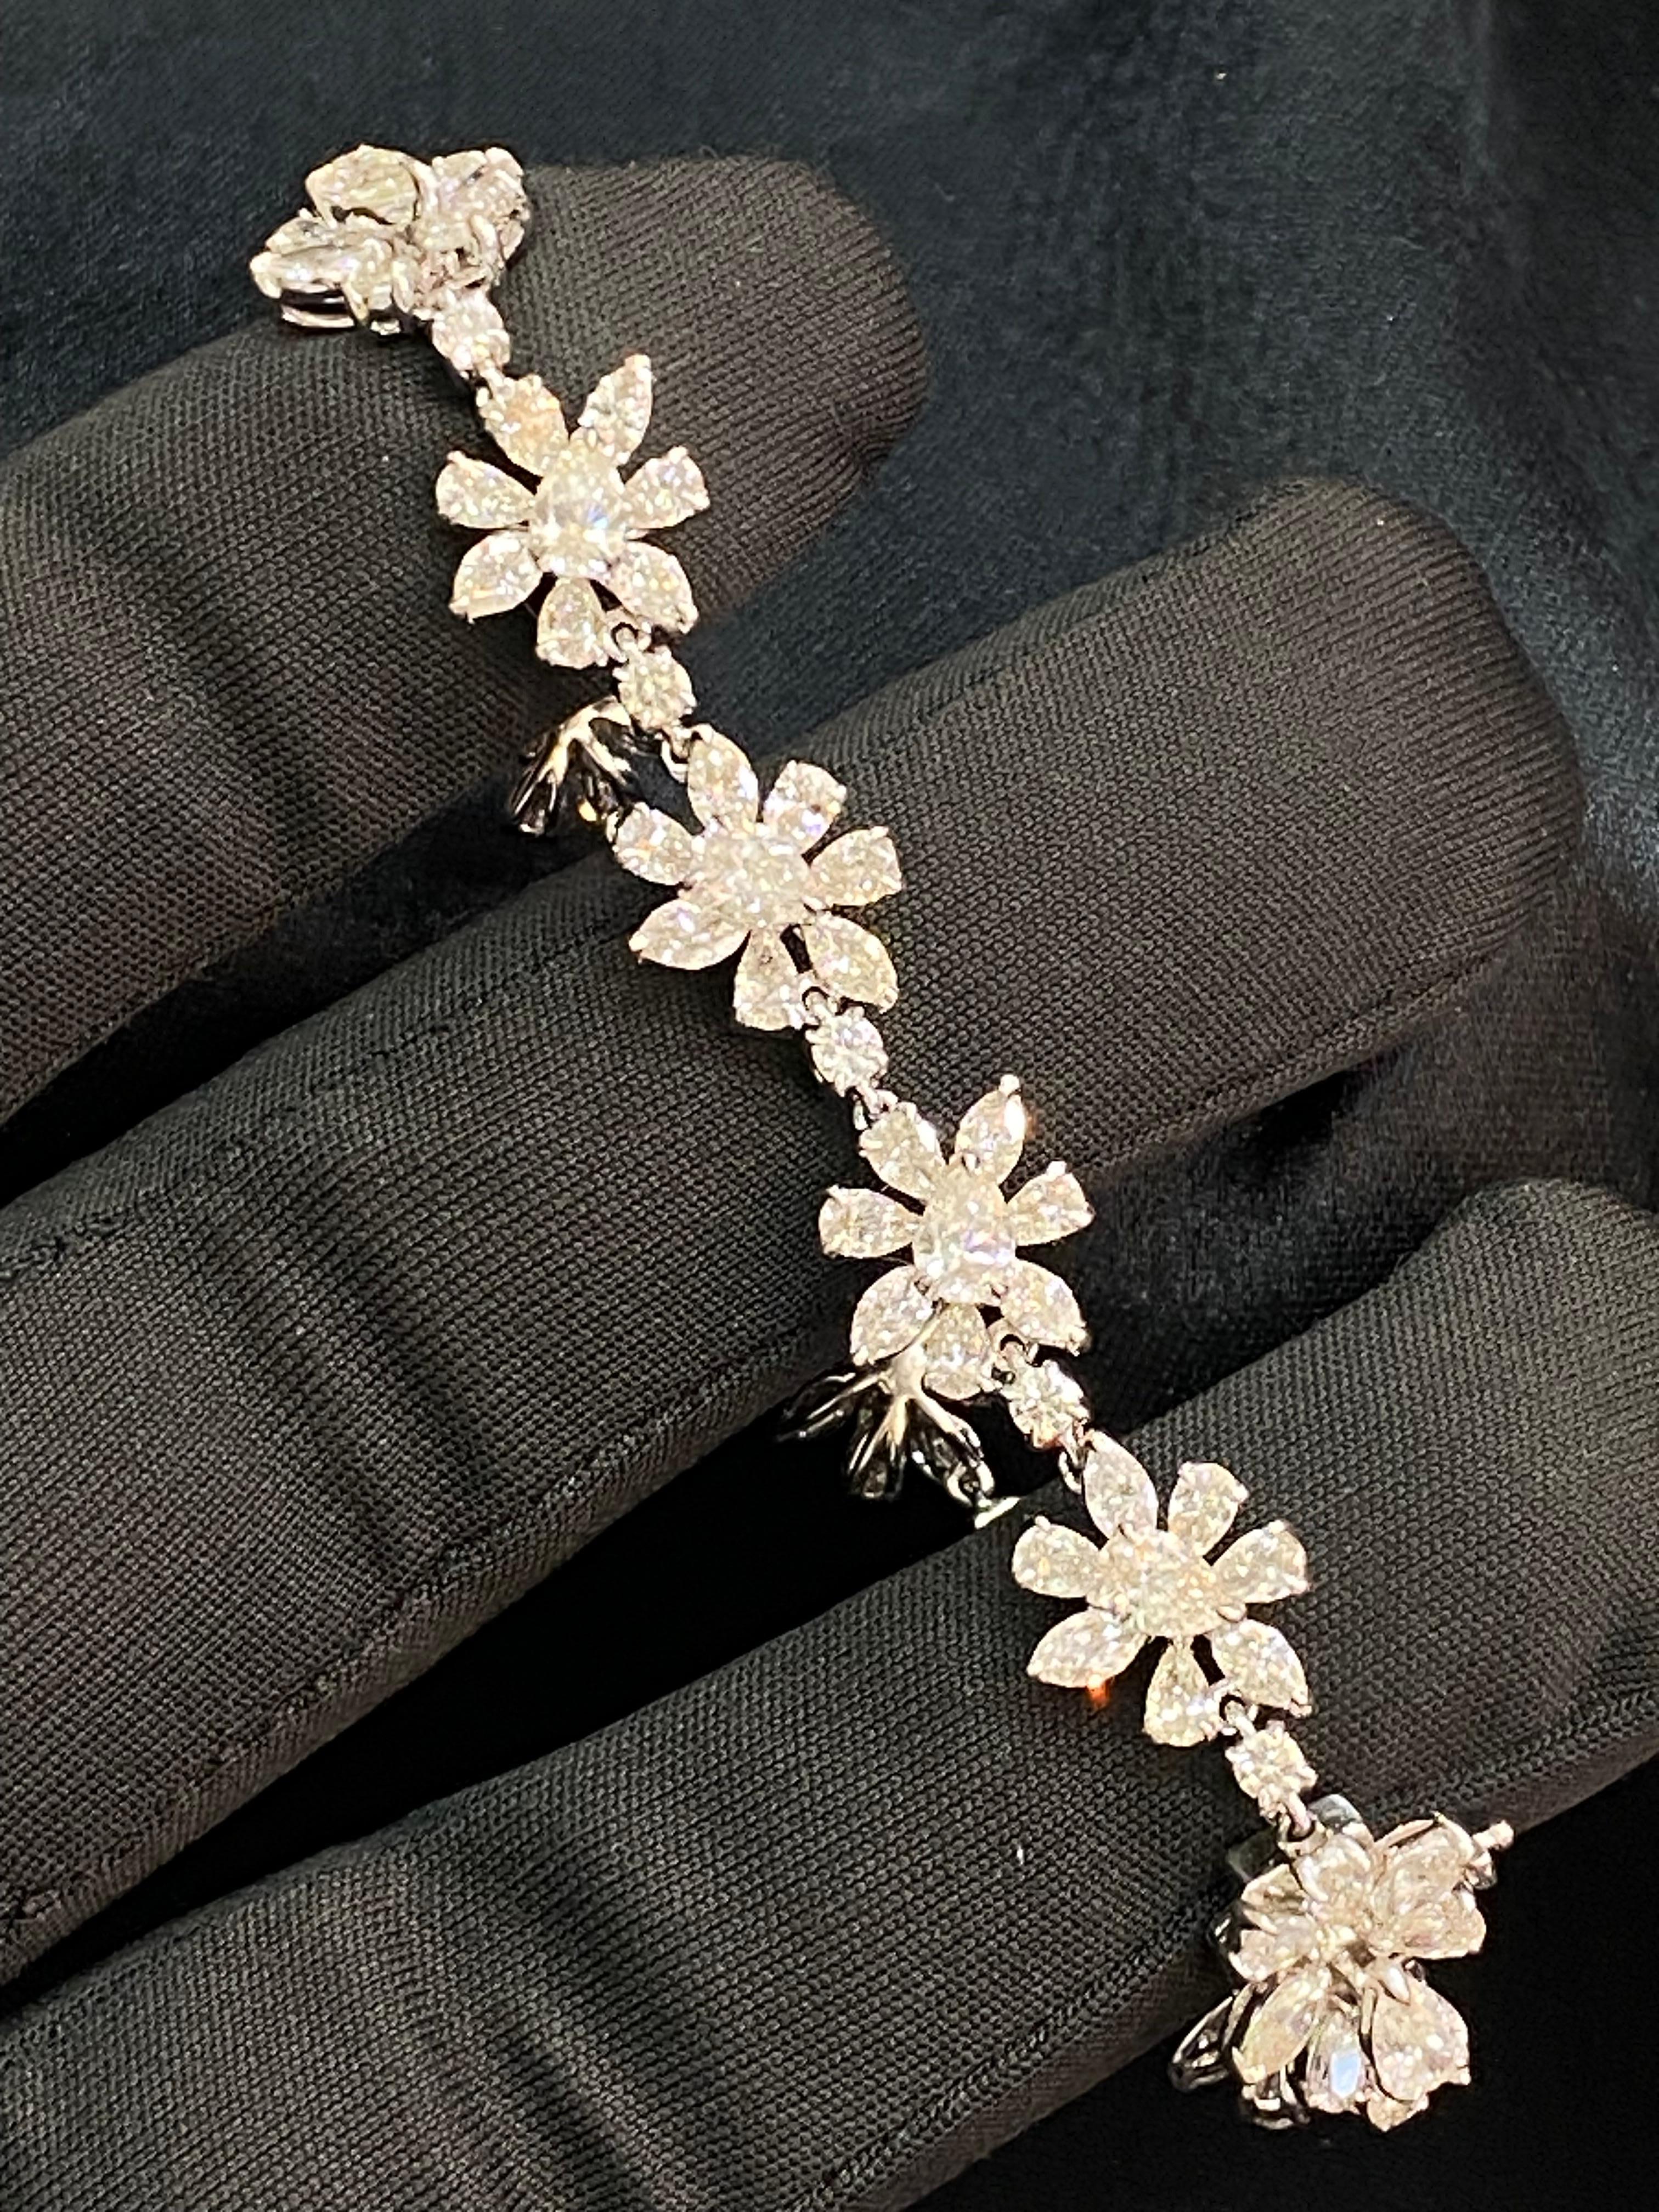 Indulge in the allure of radiant diamonds and gold with this exclusive tennis bracelet. Featuring 11.63 carats of F/VS1 fancy shape diamonds in 14K gold, it epitomizes luxury and sophistication. Make it yours and elevate your ensemble with timeless